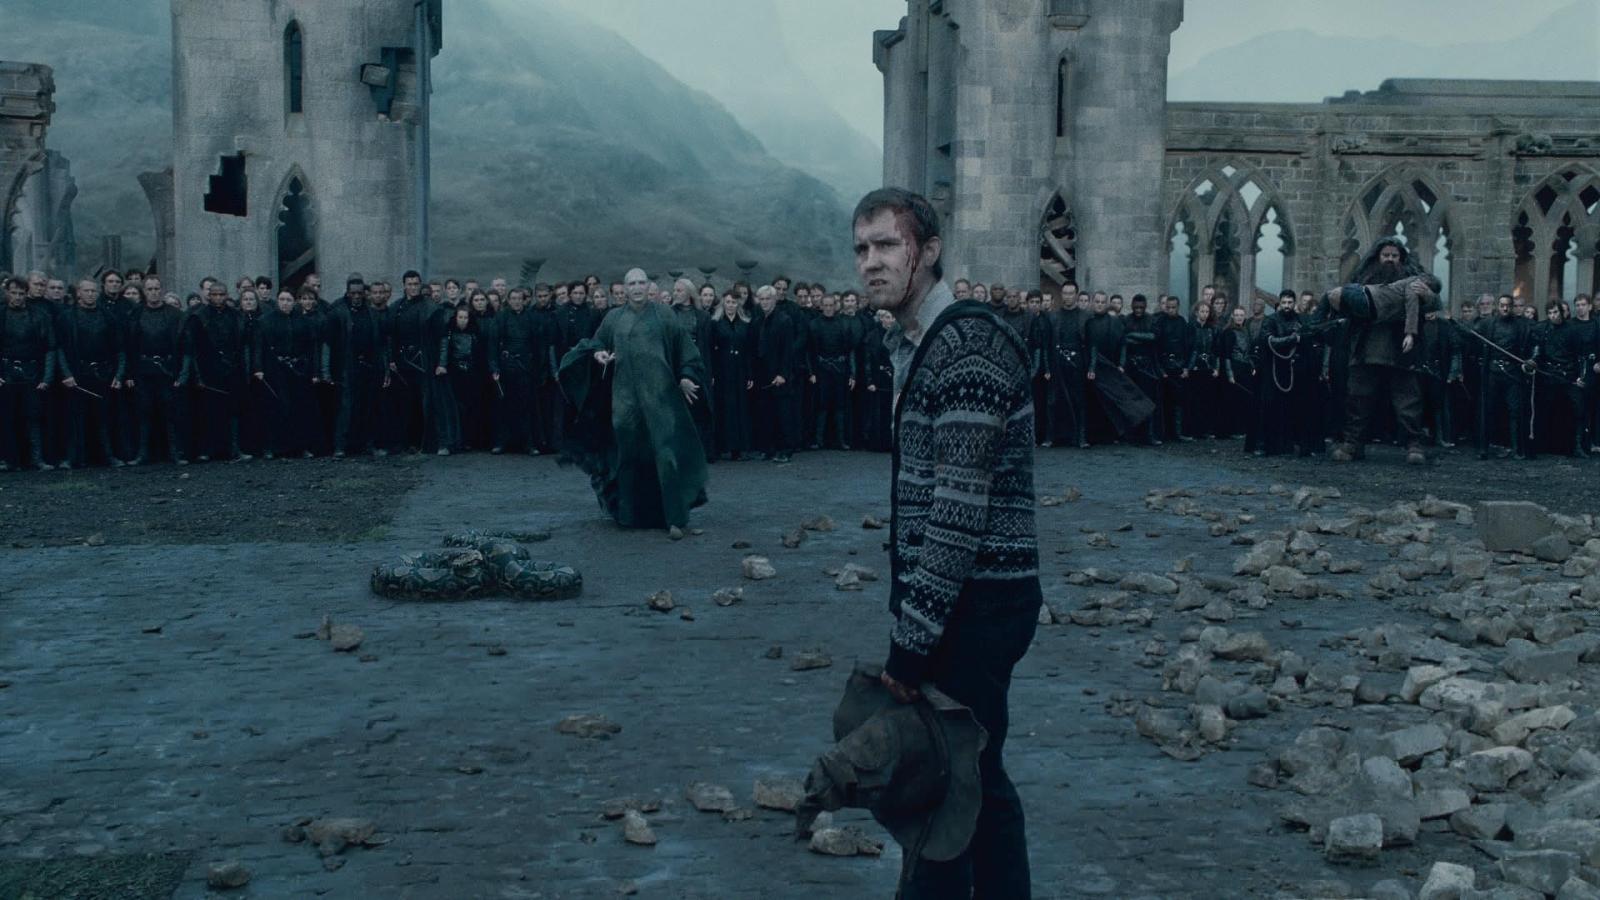 5 Heartbreaking Neville Longbottom Facts Harry Potter Movies Cut Out Entirely - image 2